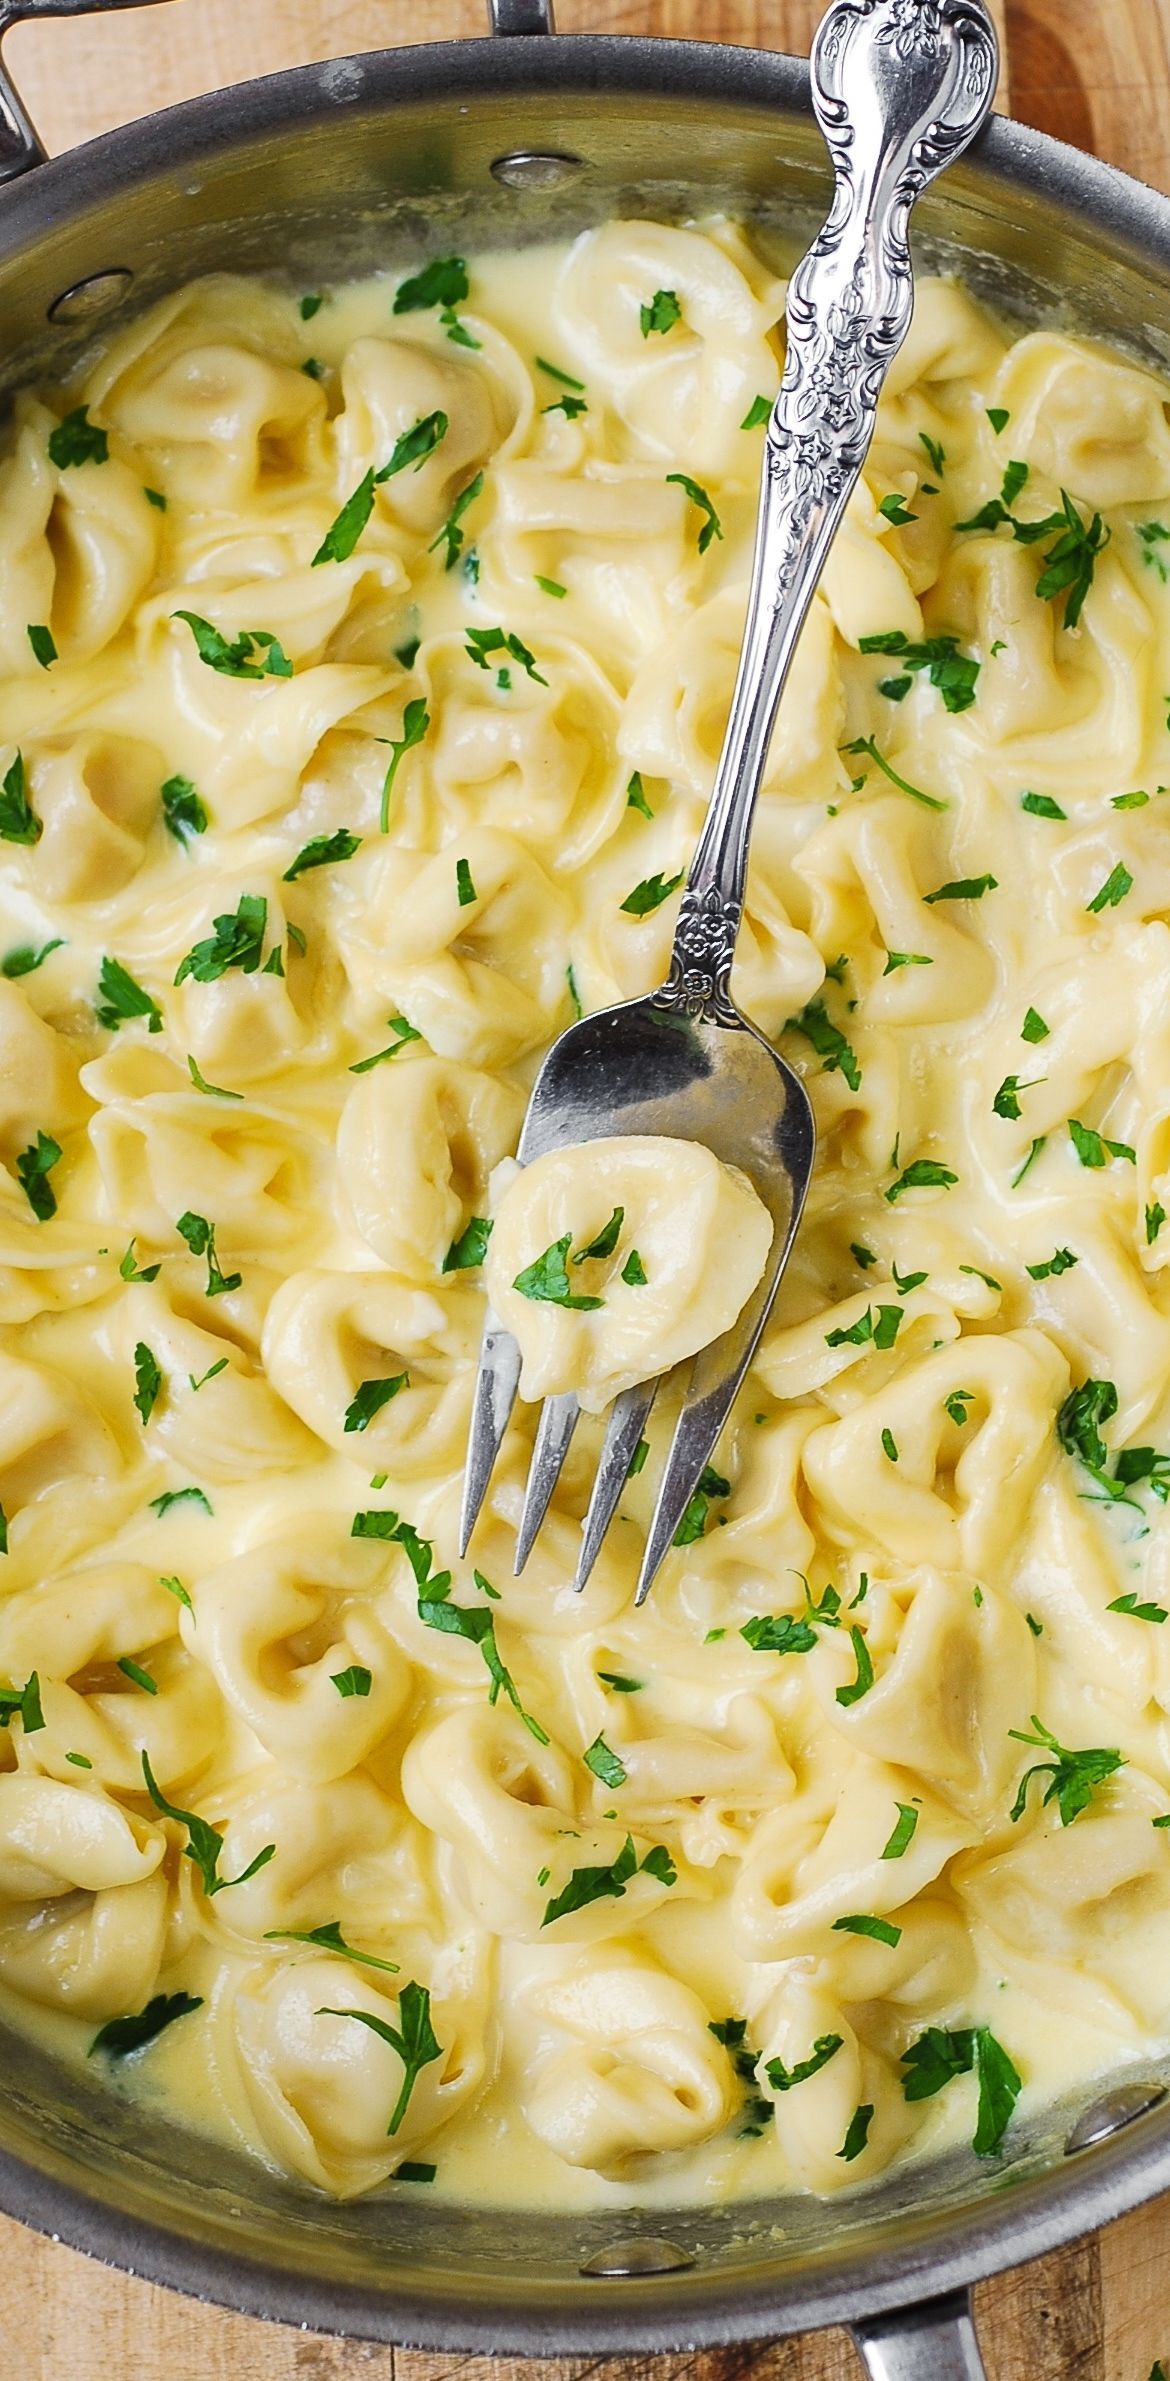 Delicious Tortellini smothered in a Creamy Asiago Cheese Garlic Sauce – easy, 30-minute pasta recipe!